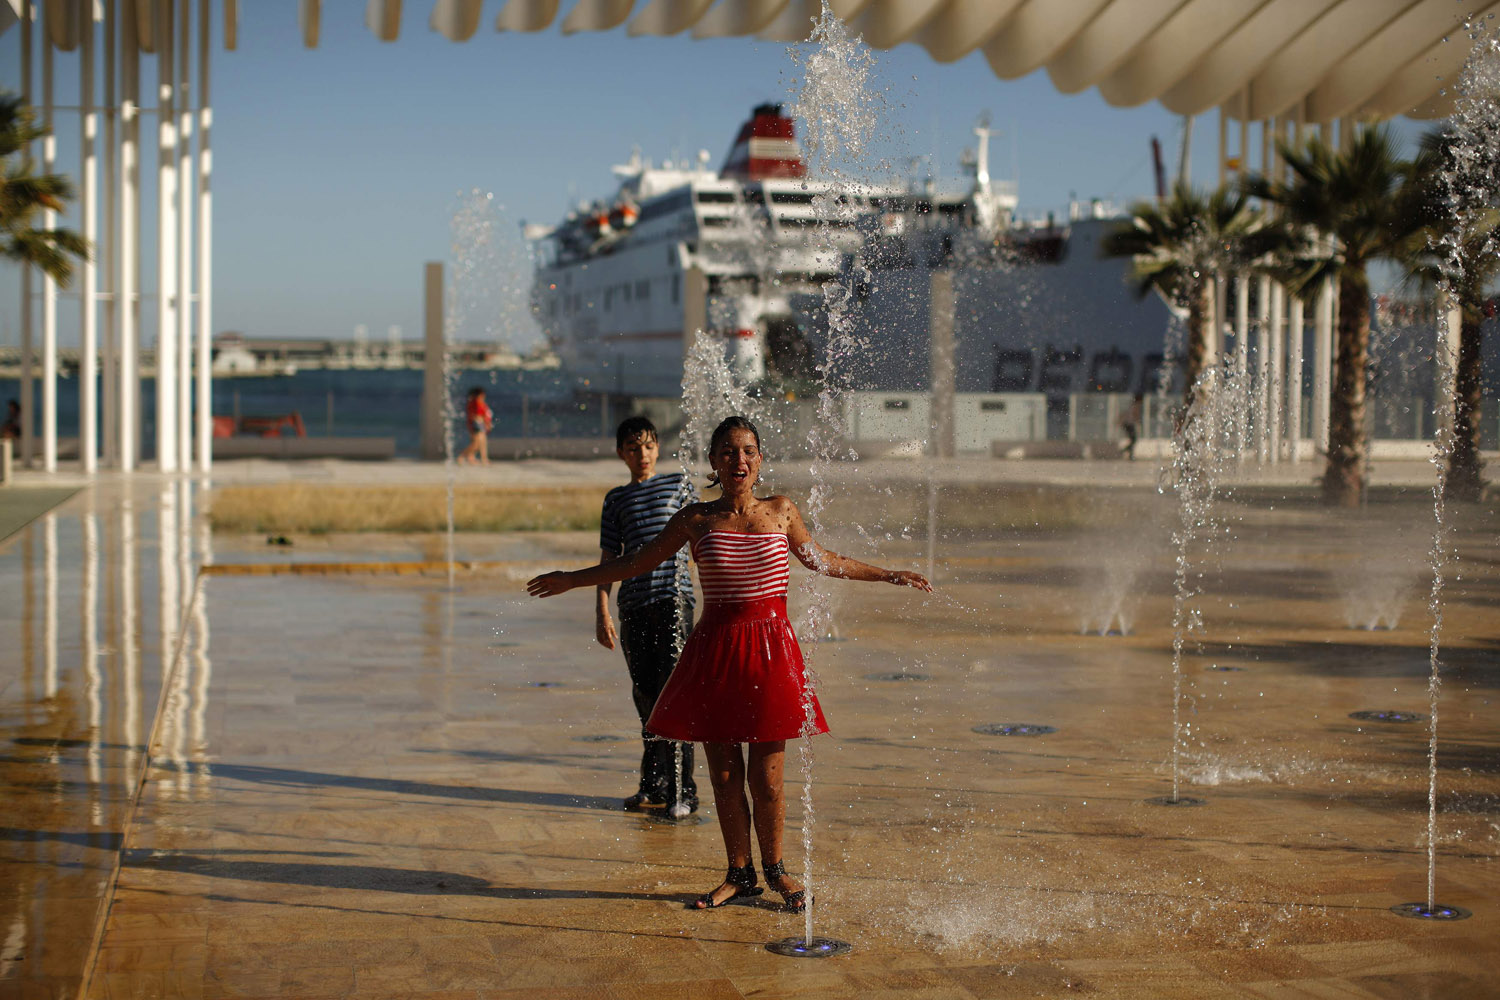 June 10, 2012. A girl and a boy cool off in a fountain during a hot day at the port in Malaga, southern Spain.